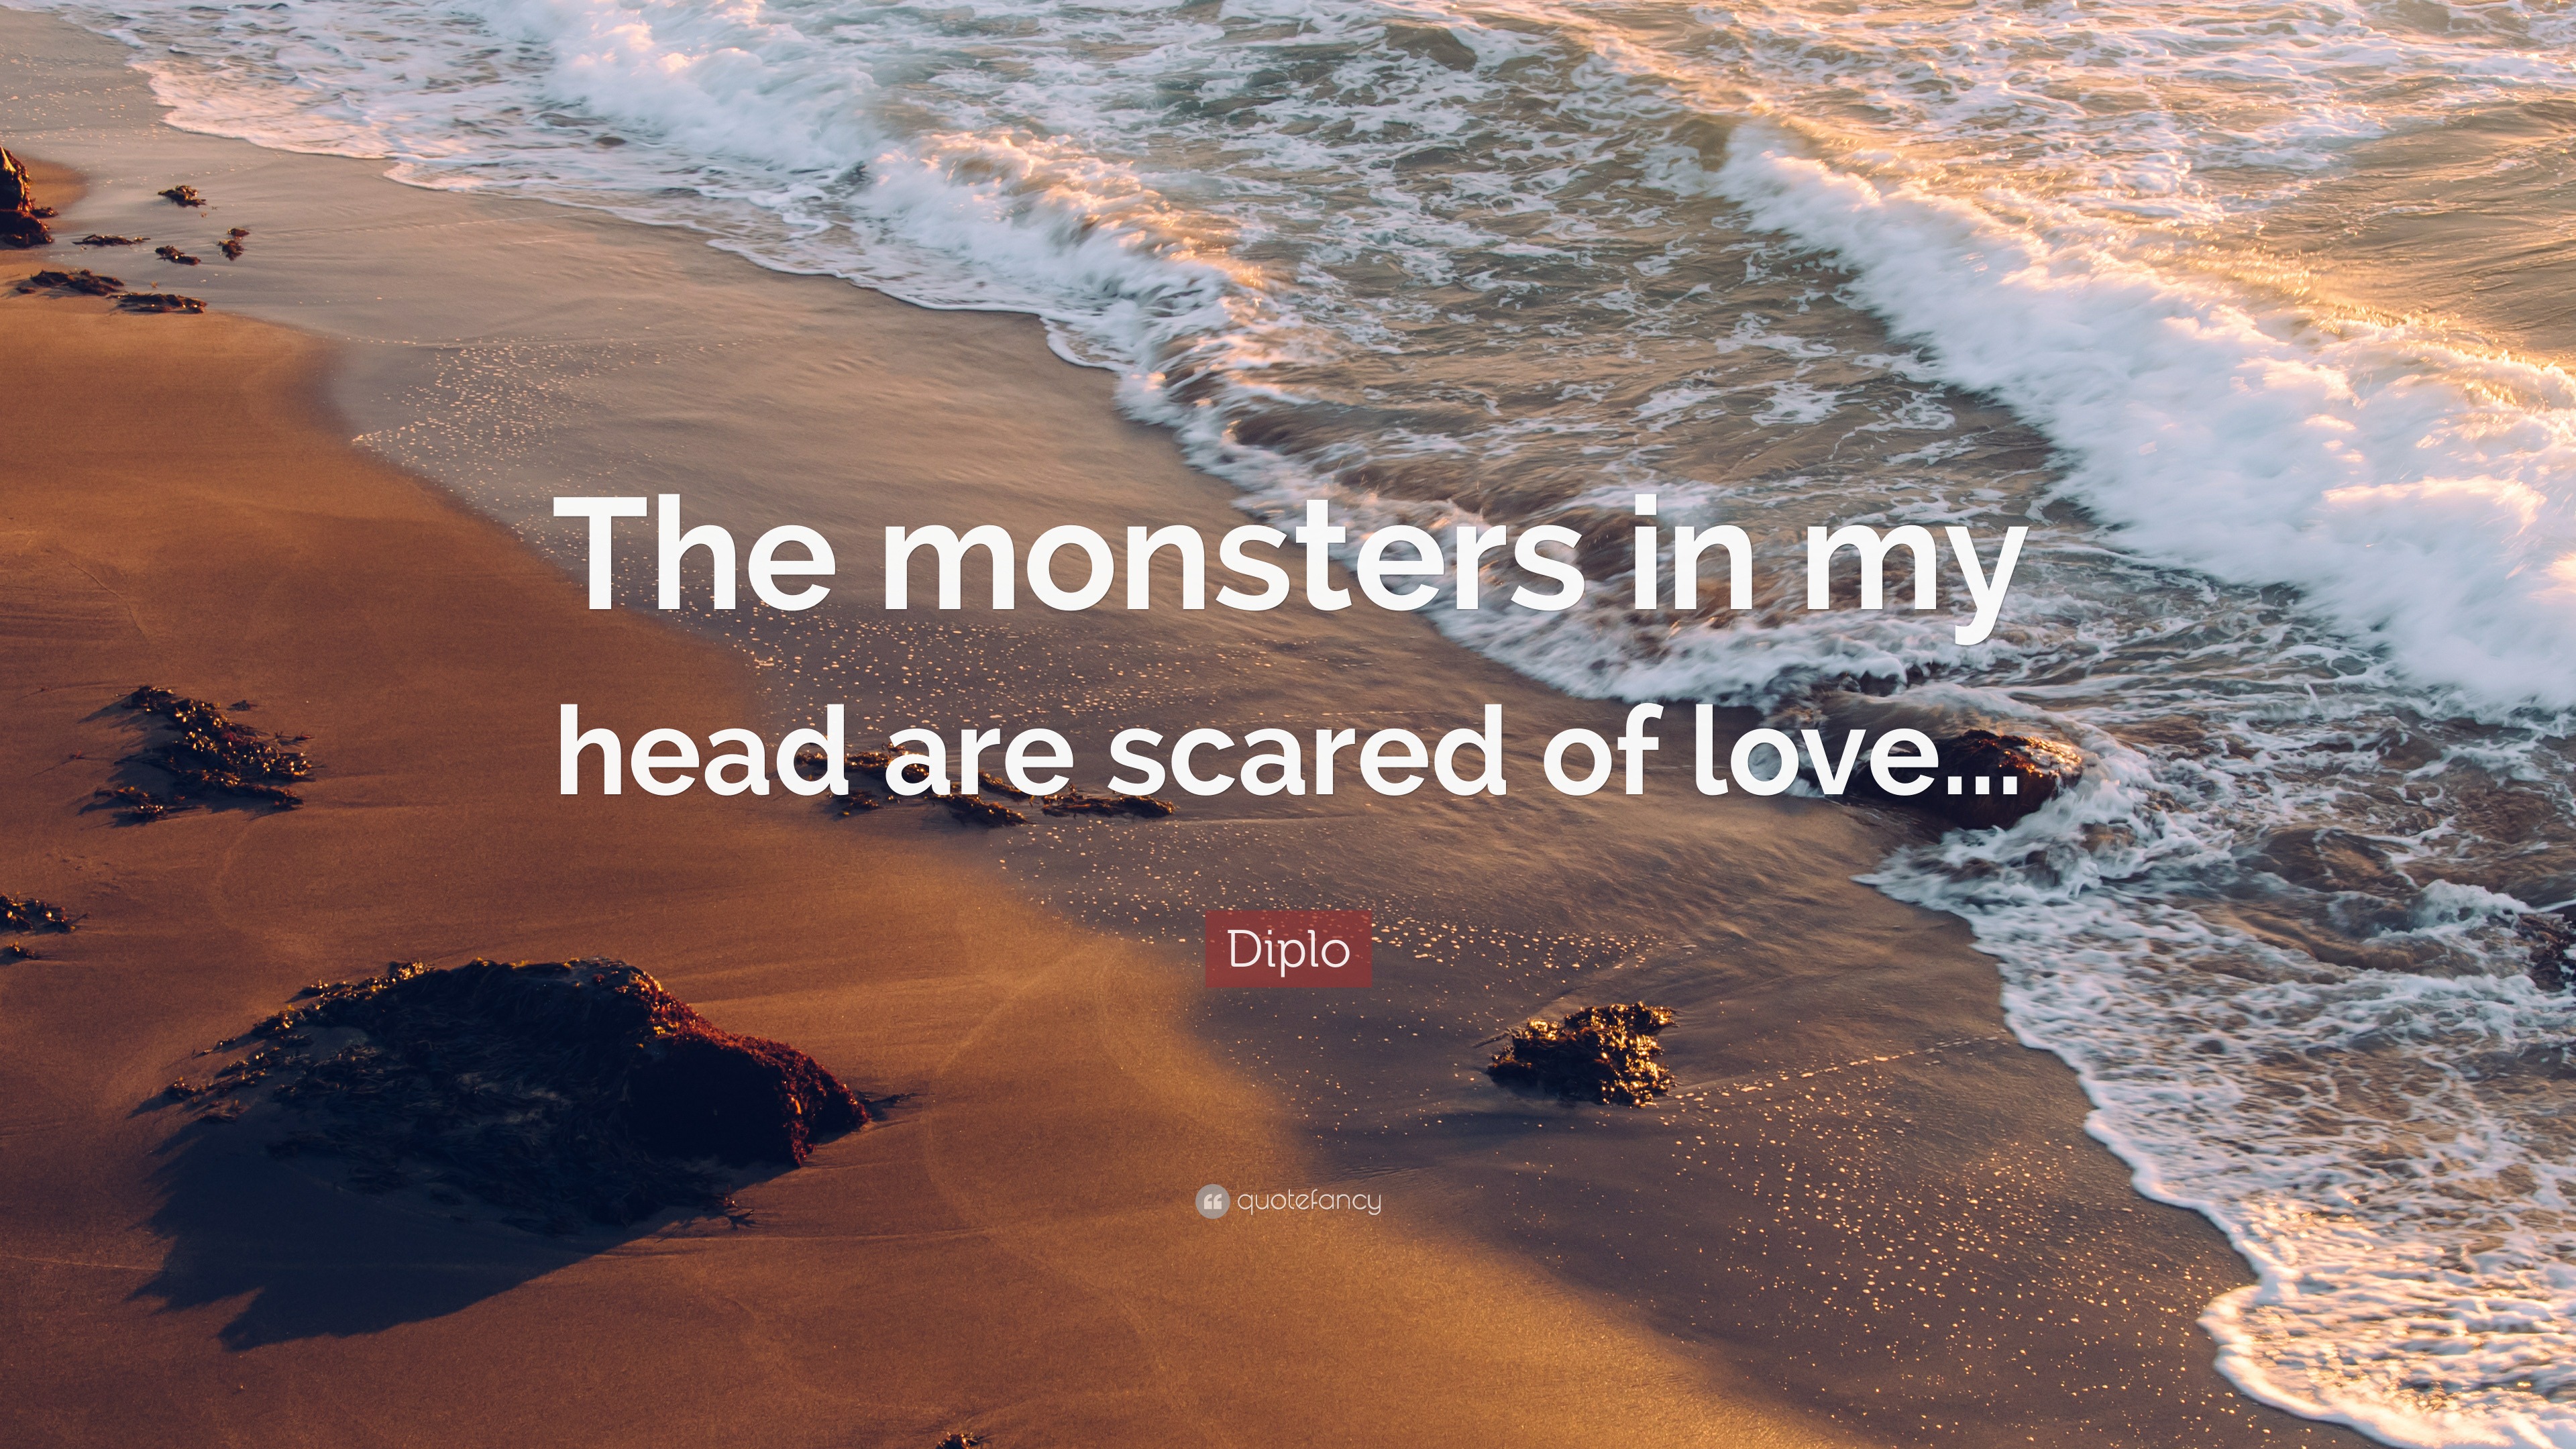 Diplo Quote: “The monsters in my head are scared of love...”